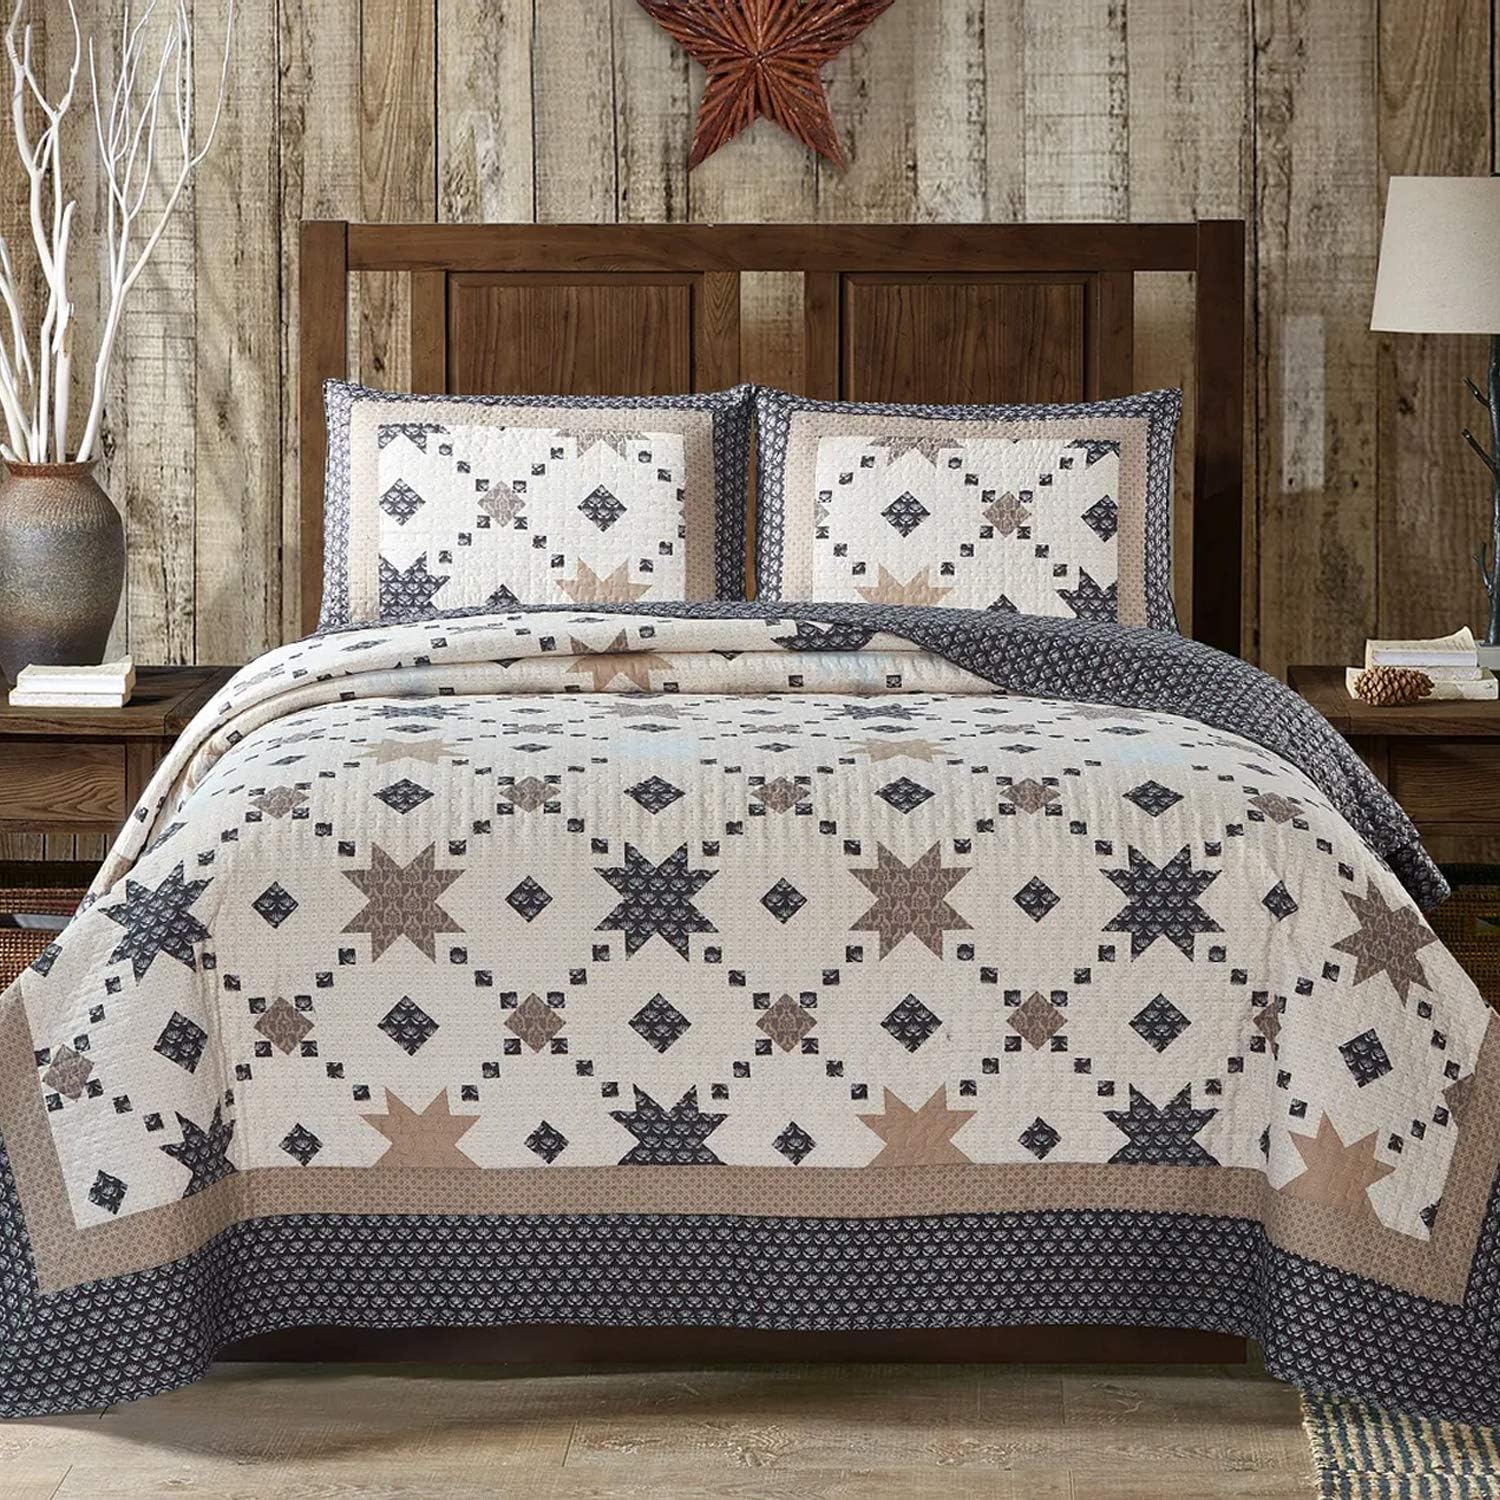 Virah Bella 3 Piece King Cabin Quilt Bedding Set - Midnight Star - Rustic Country Reversible Patchwork Comforter Set with Decorative Pillow Shams